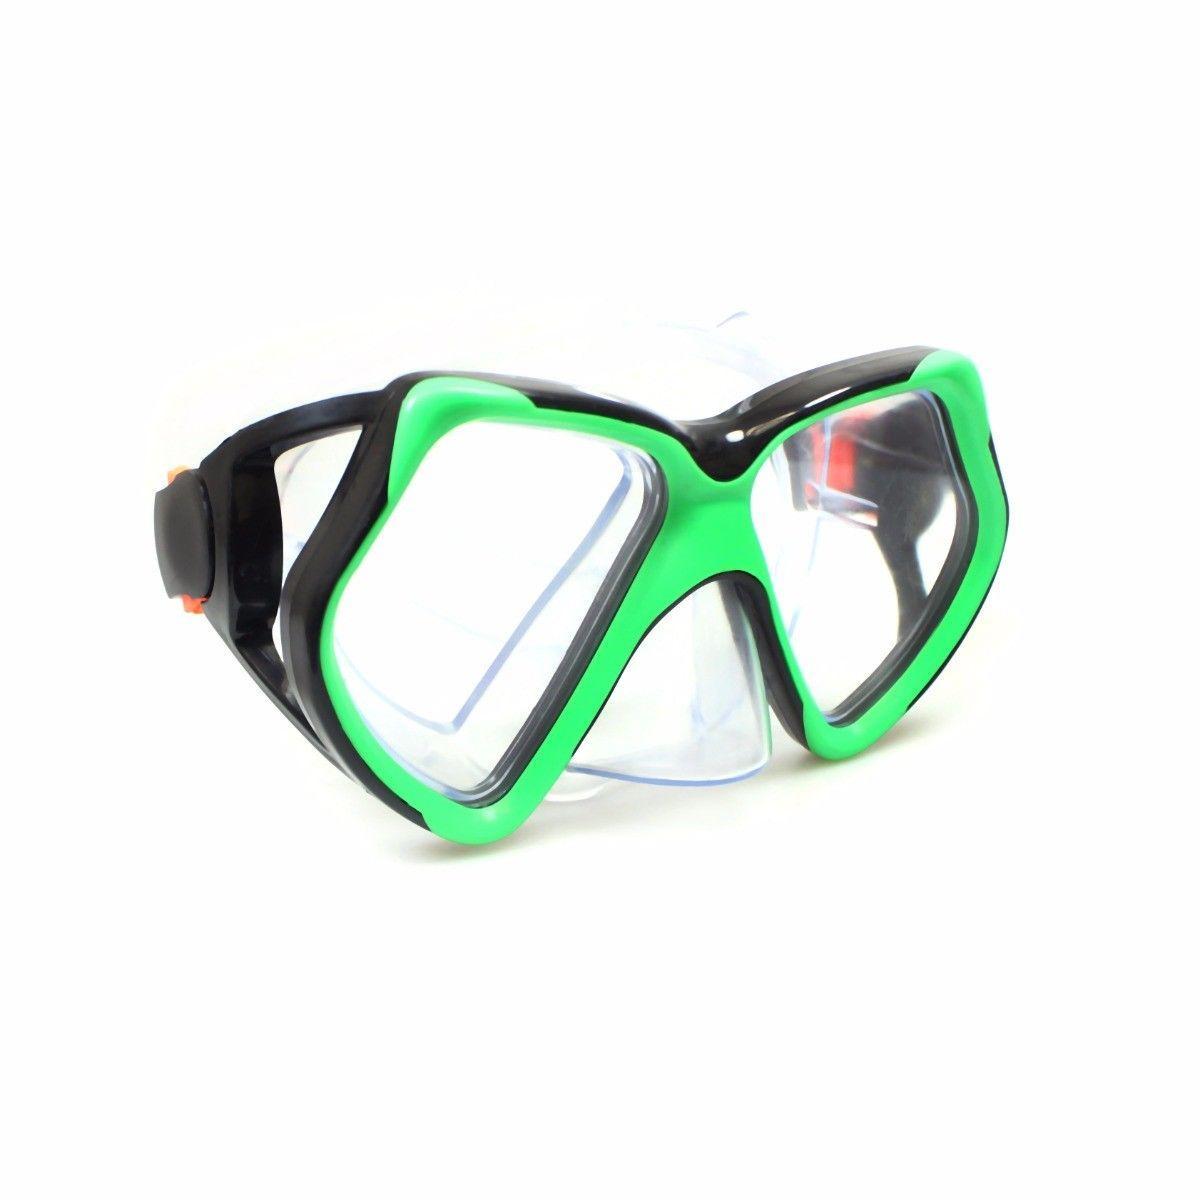 New Adjustable Stylish Comfortable Swimming Goggles In Assorted Colours Outdoors 4275 (Parcel Rate)